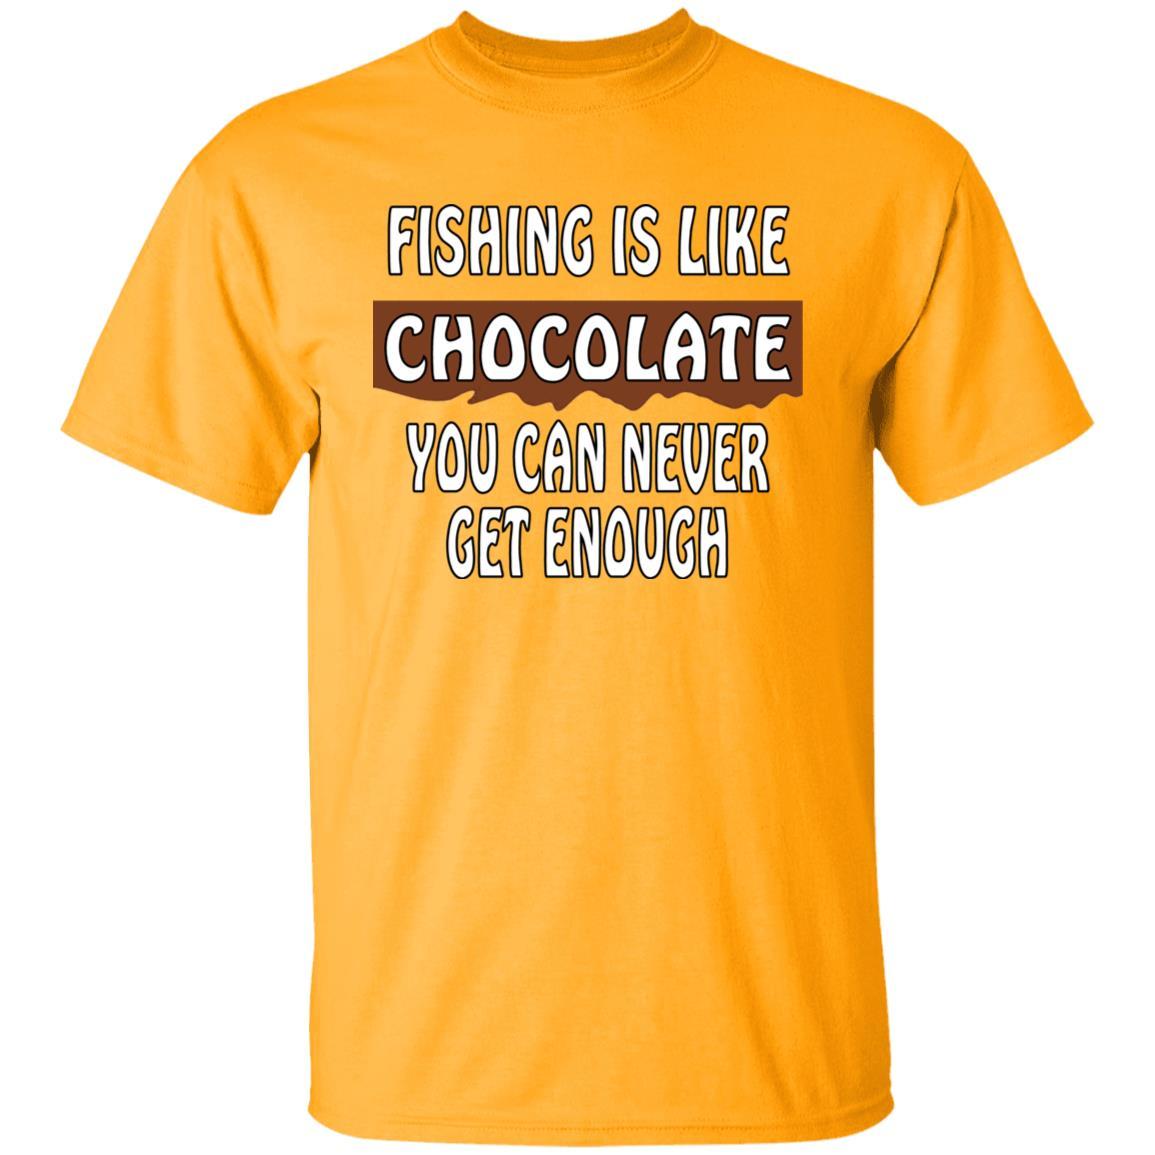 Fishing is like chocolate you can never get enough t-shirt gold